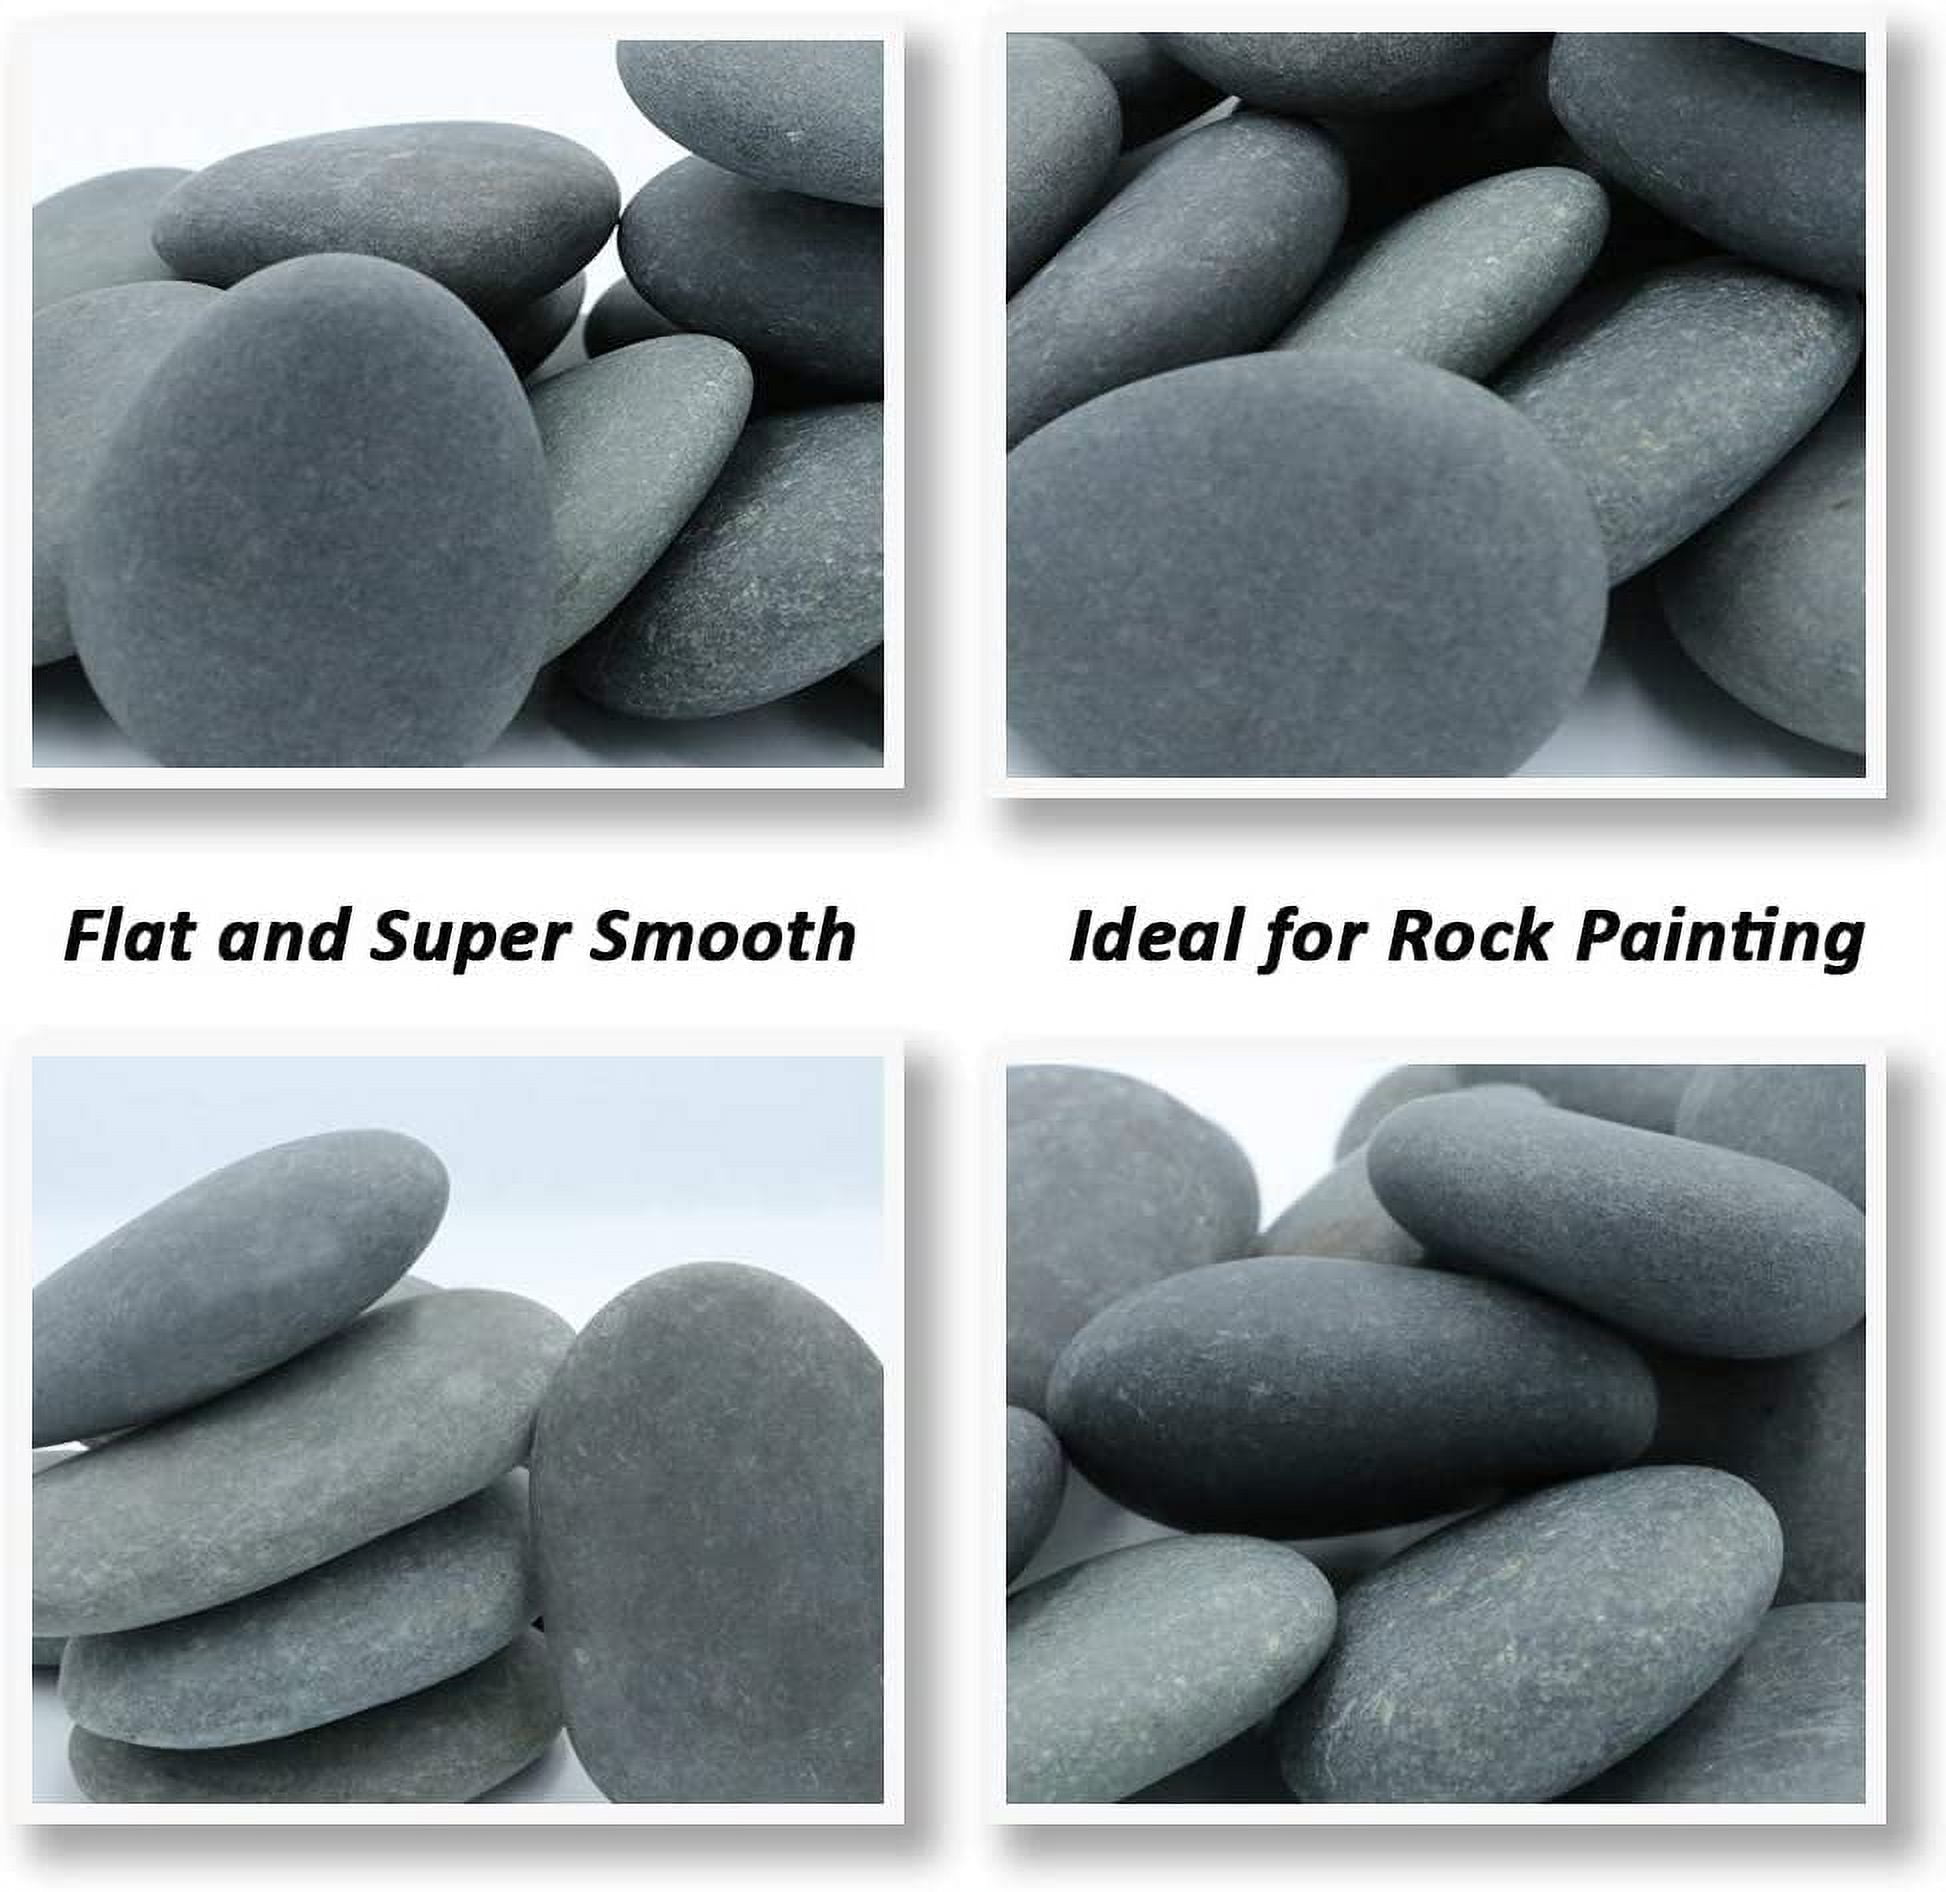 Koltose by Mash Craft Rocks for Rock Painting, 7 Smooth Flat Surfaced Stones for Kindness Stones and Rock Painting, 2 - 3.5 inch River Rocks